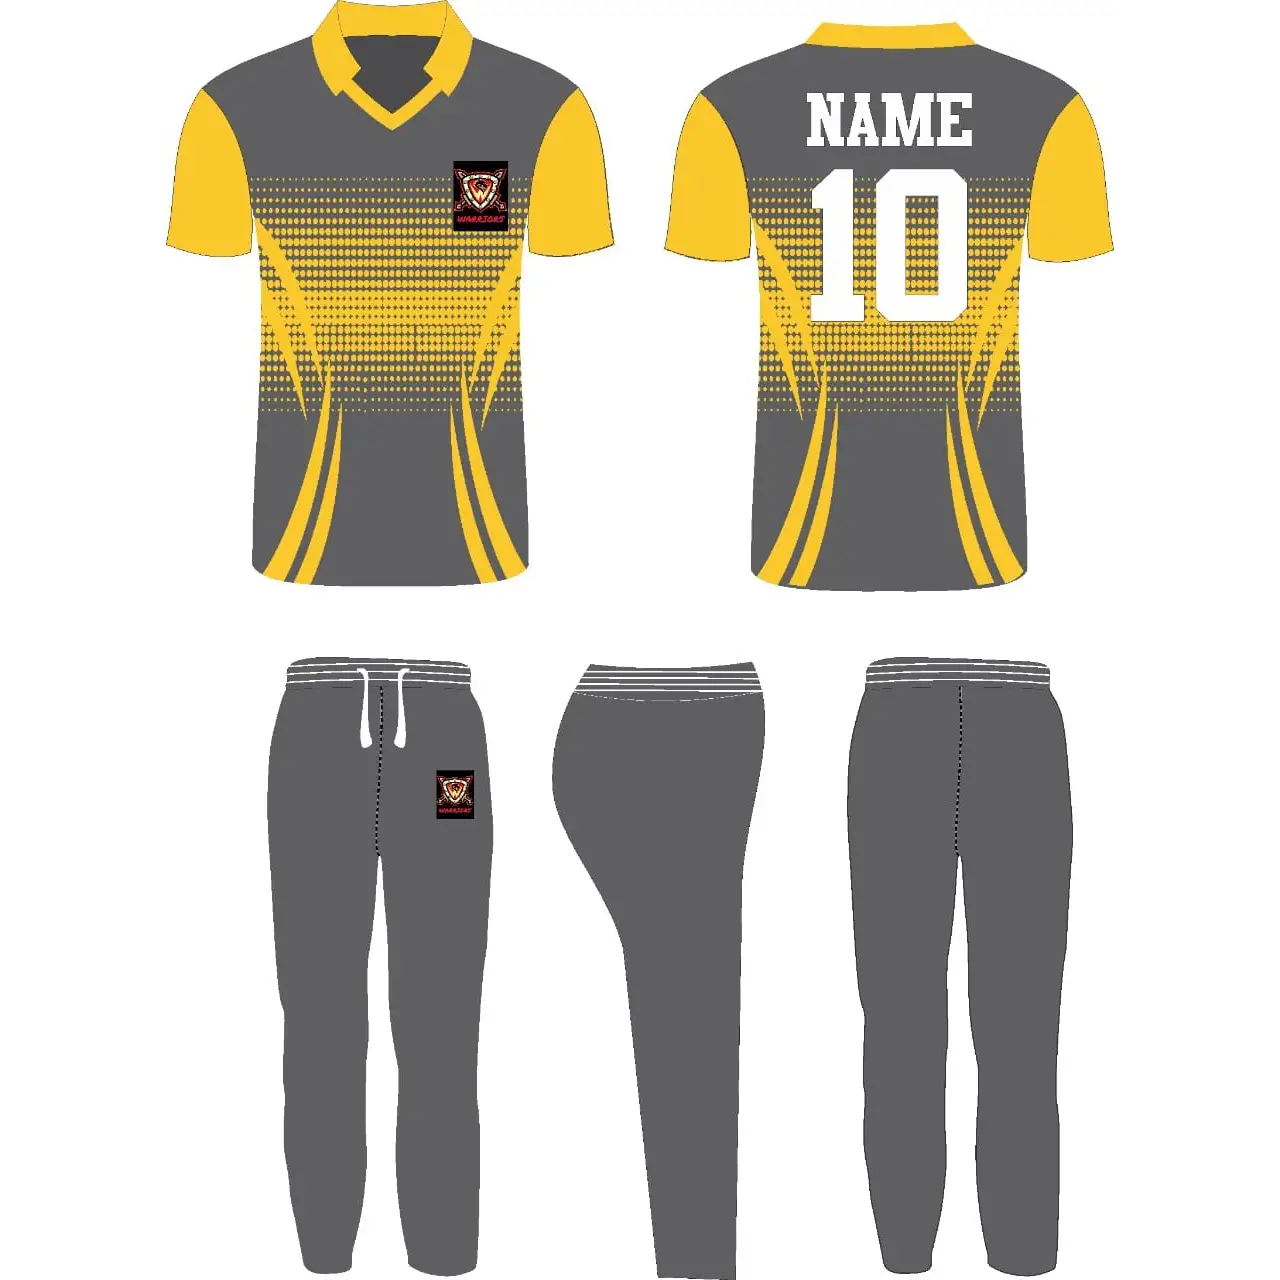 Customizable Cricket Shirt And Trouser With Name Number and logo - Yellow And Grey - Custom Cricket Wear 2PC Full